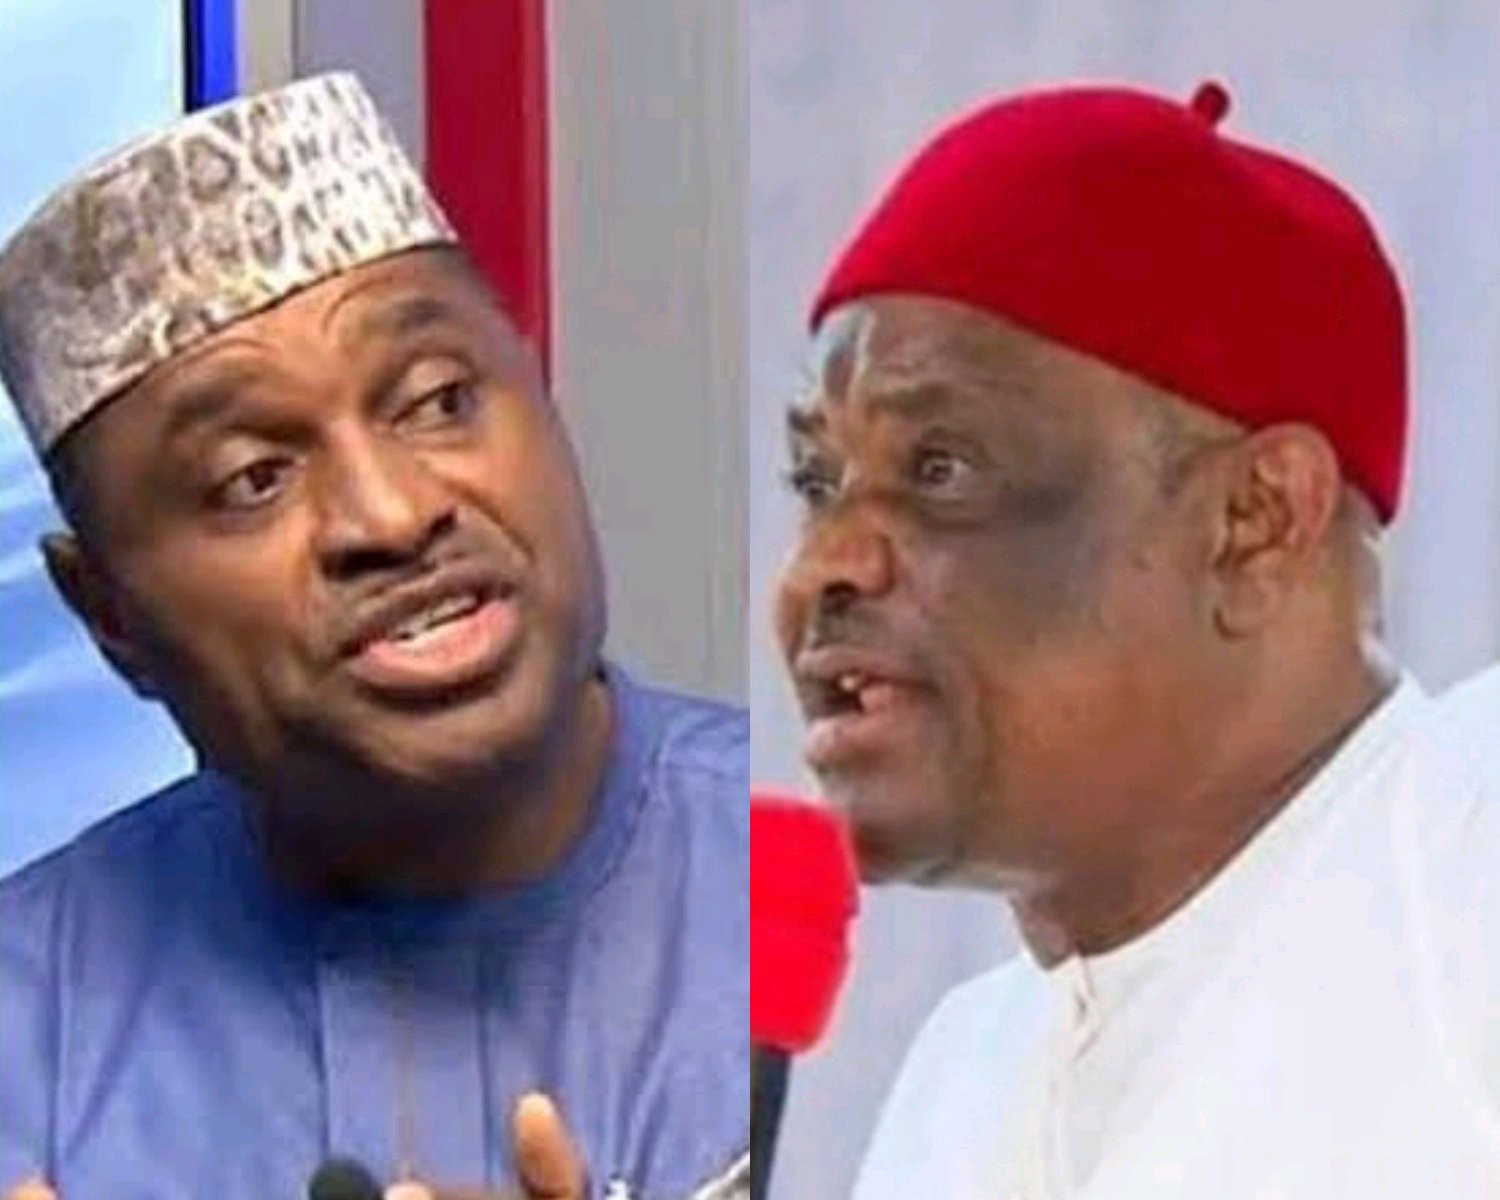 Wike: "A PDP presidential aspirant who vowed never to leave PDP is now a minister in APC" - According to Okonkwo